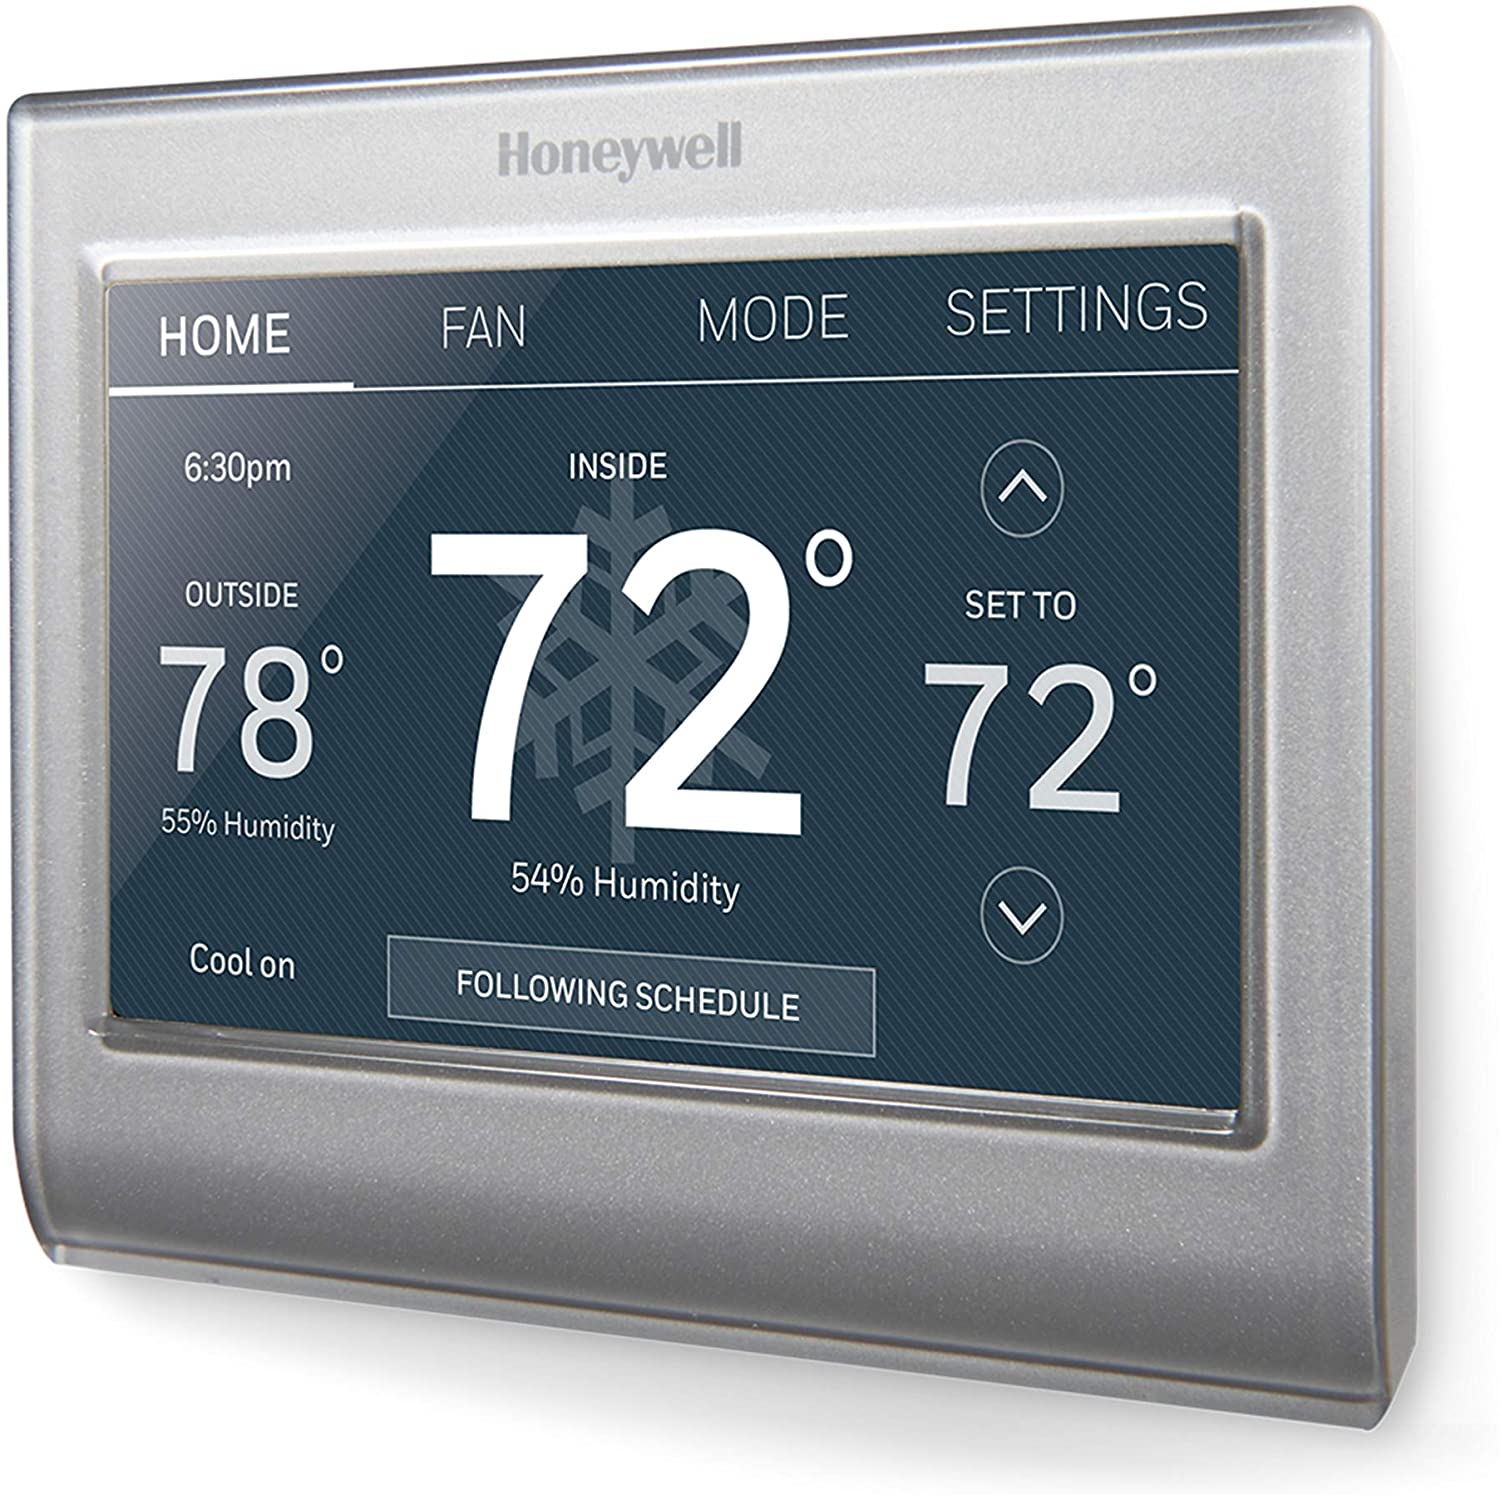 Honeywell Home Touchscreen Thermostat | Solutions MS Marketplace